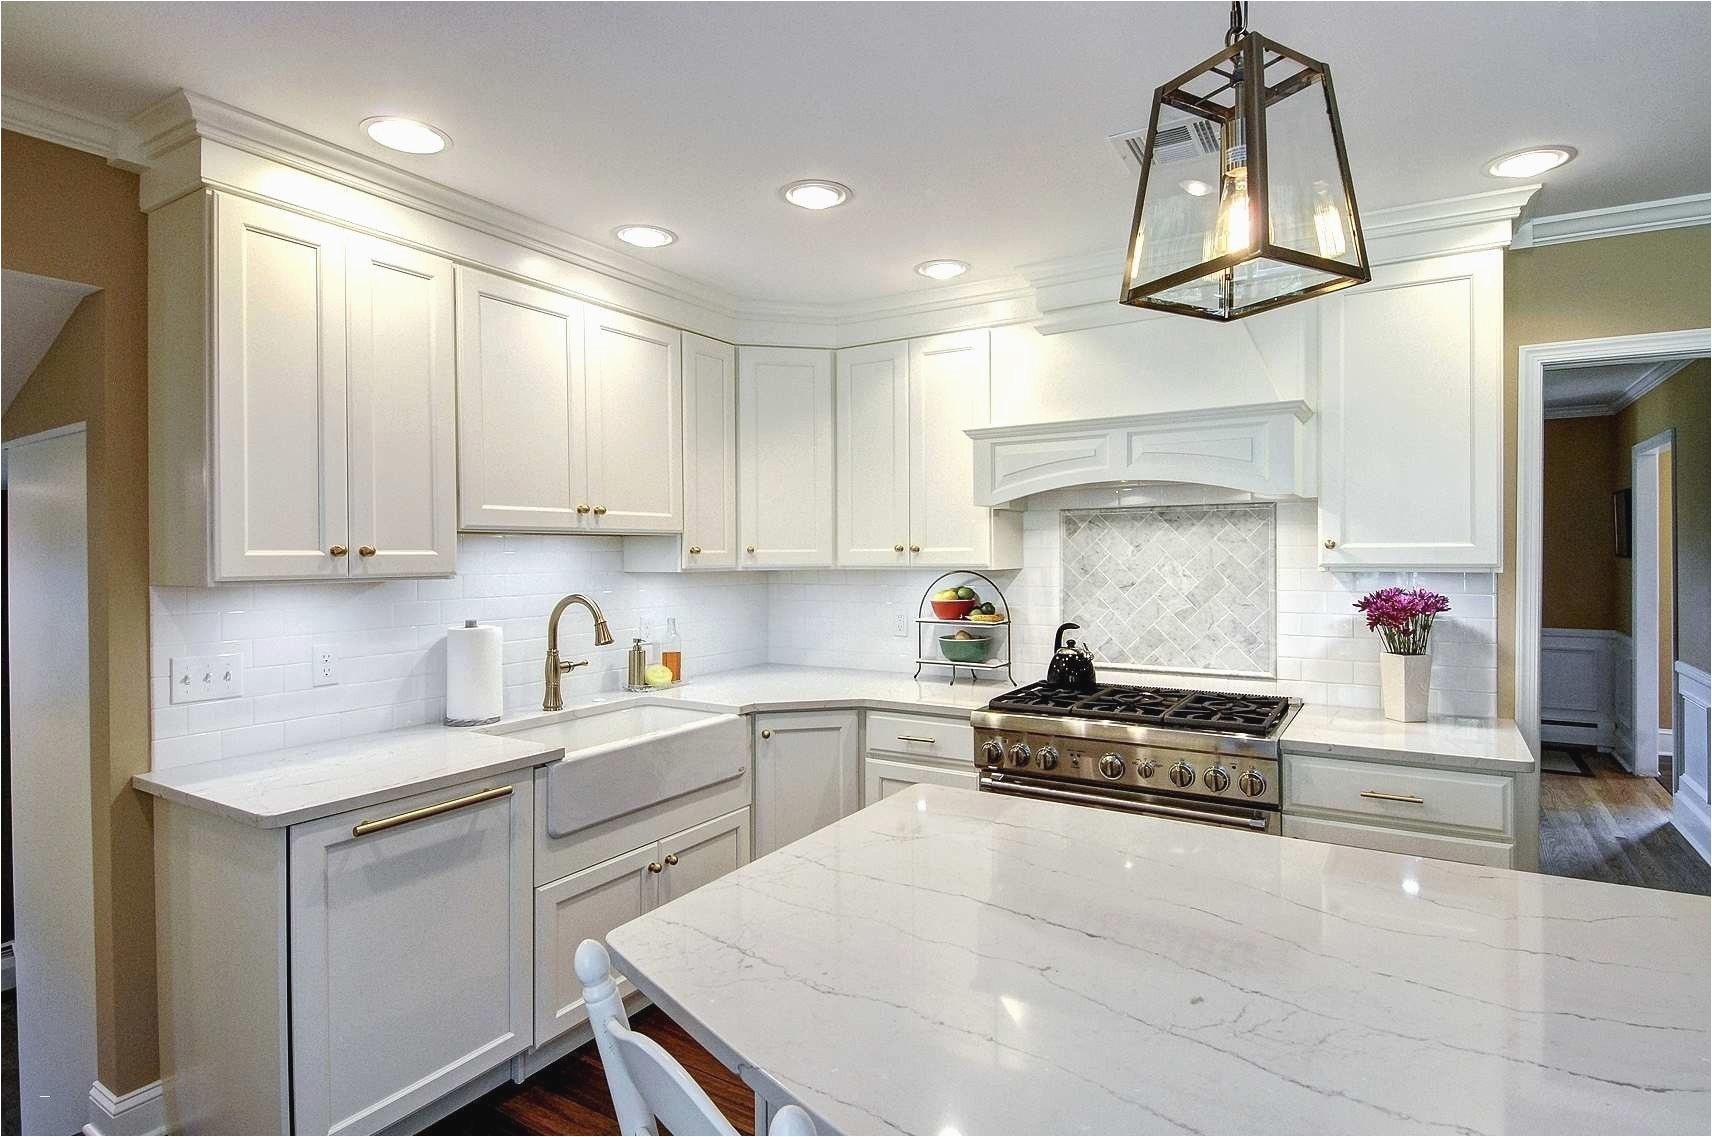 Gallery of Motivational White or Cream Kitchen Cabinets